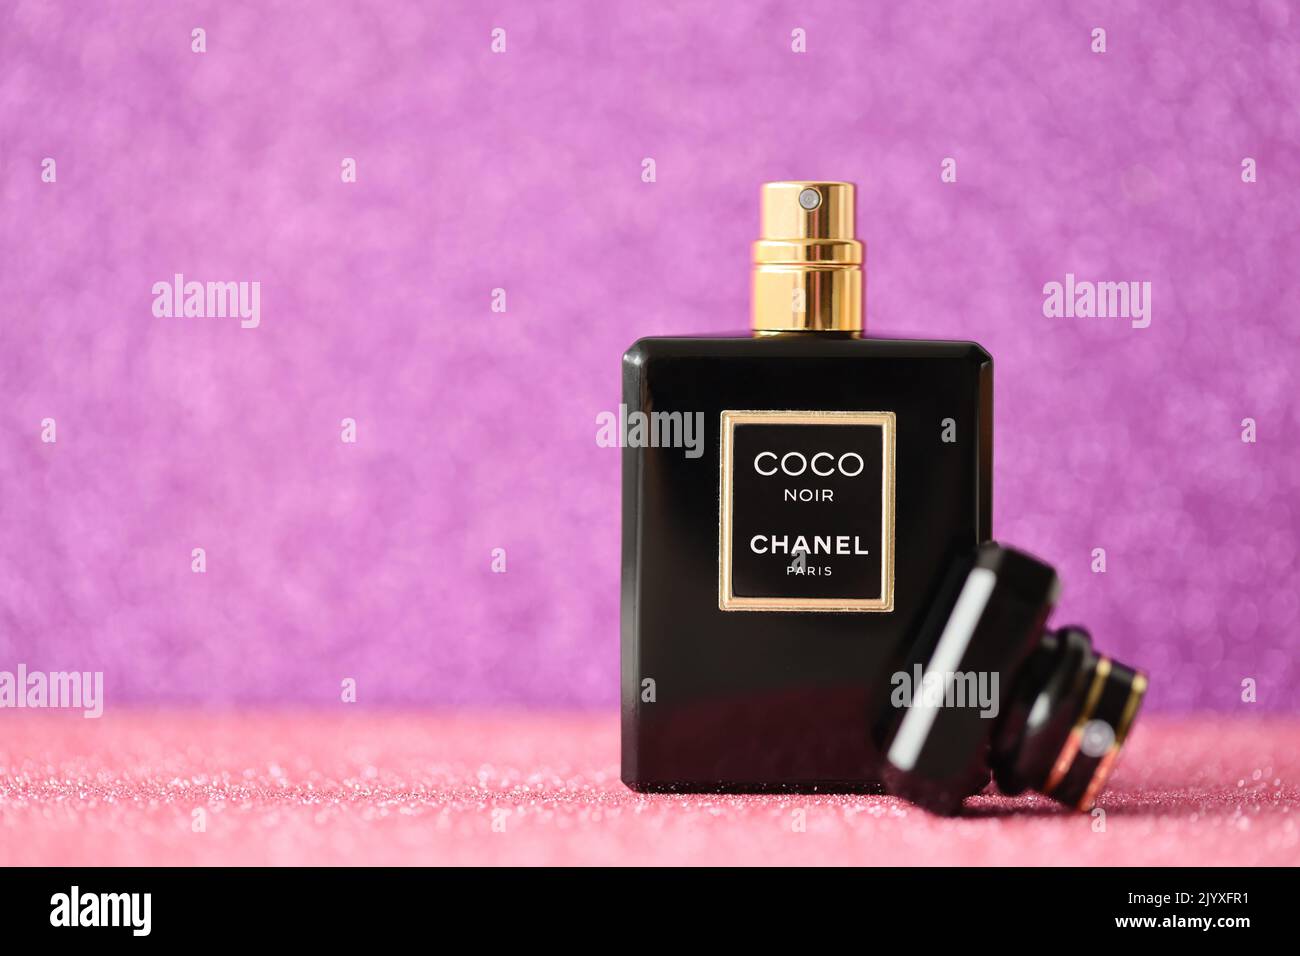 TERNOPIL, UKRAINE - SEPTEMBER 2, 2022 Coco Noir Chanel Paris worldwide famous french perfume black bottle on shiny glitter background in purple and pi Stock Photo